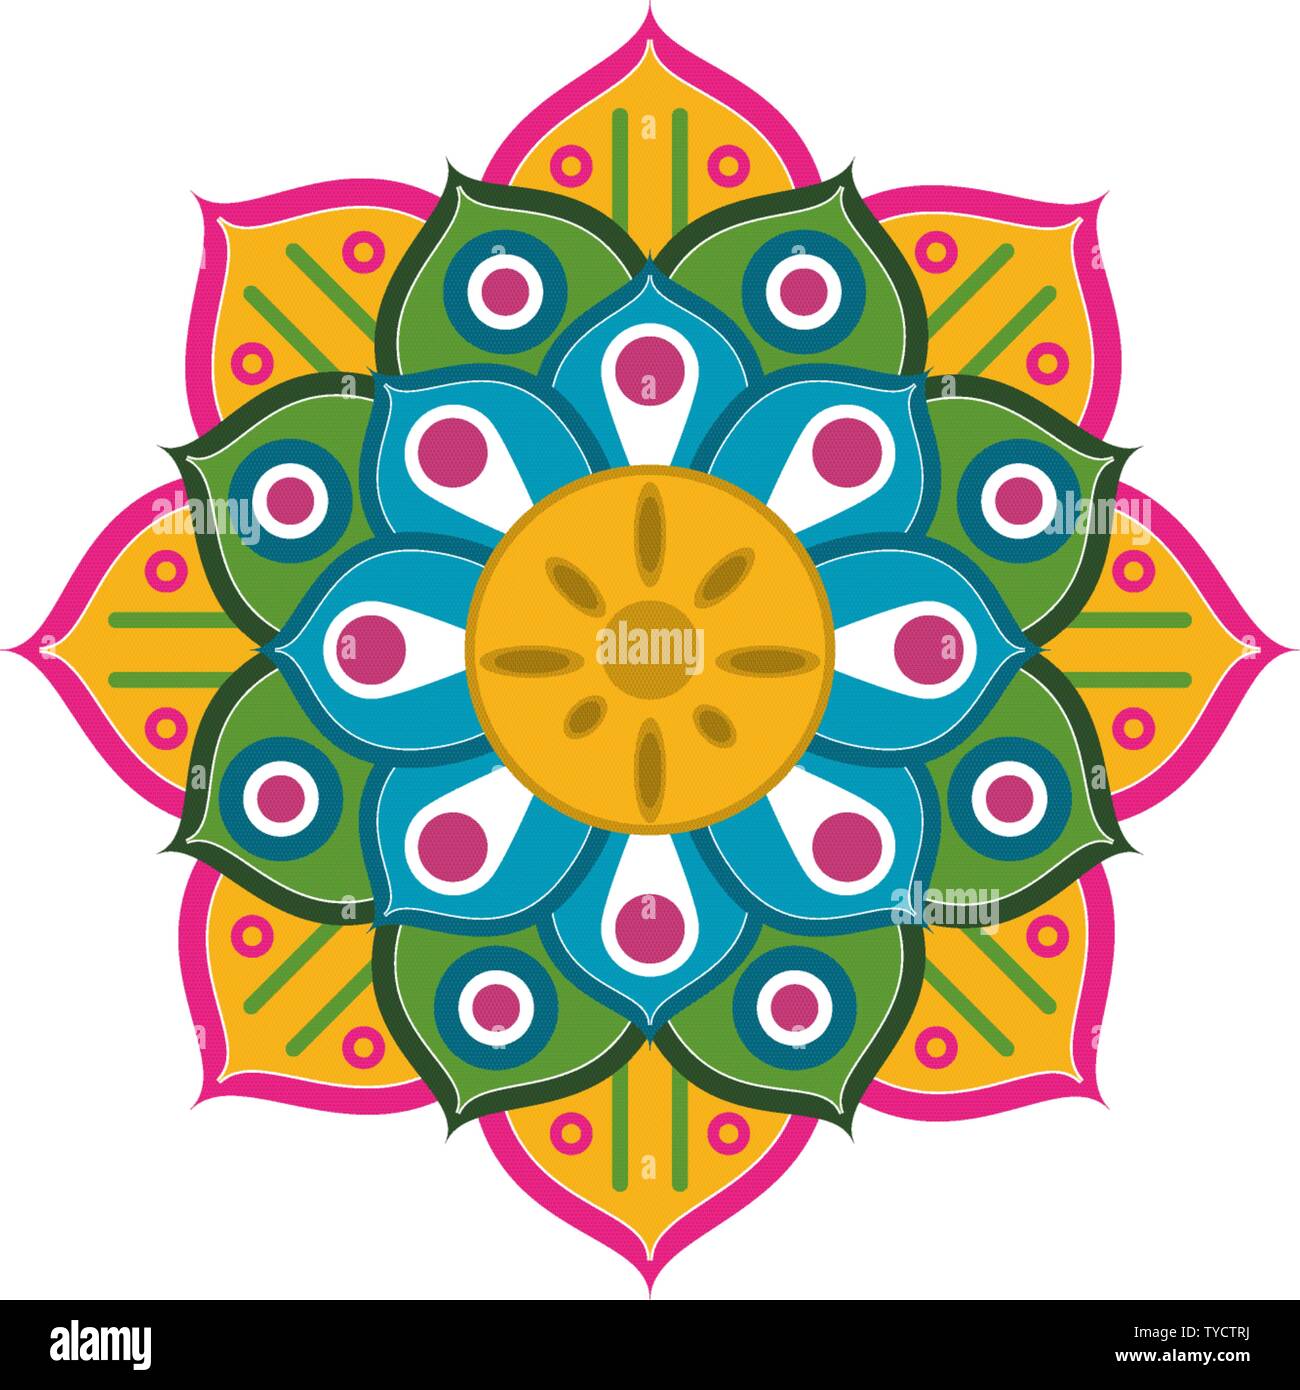 Indian Embroidery High Resolution Stock Photography and Images - Alamy